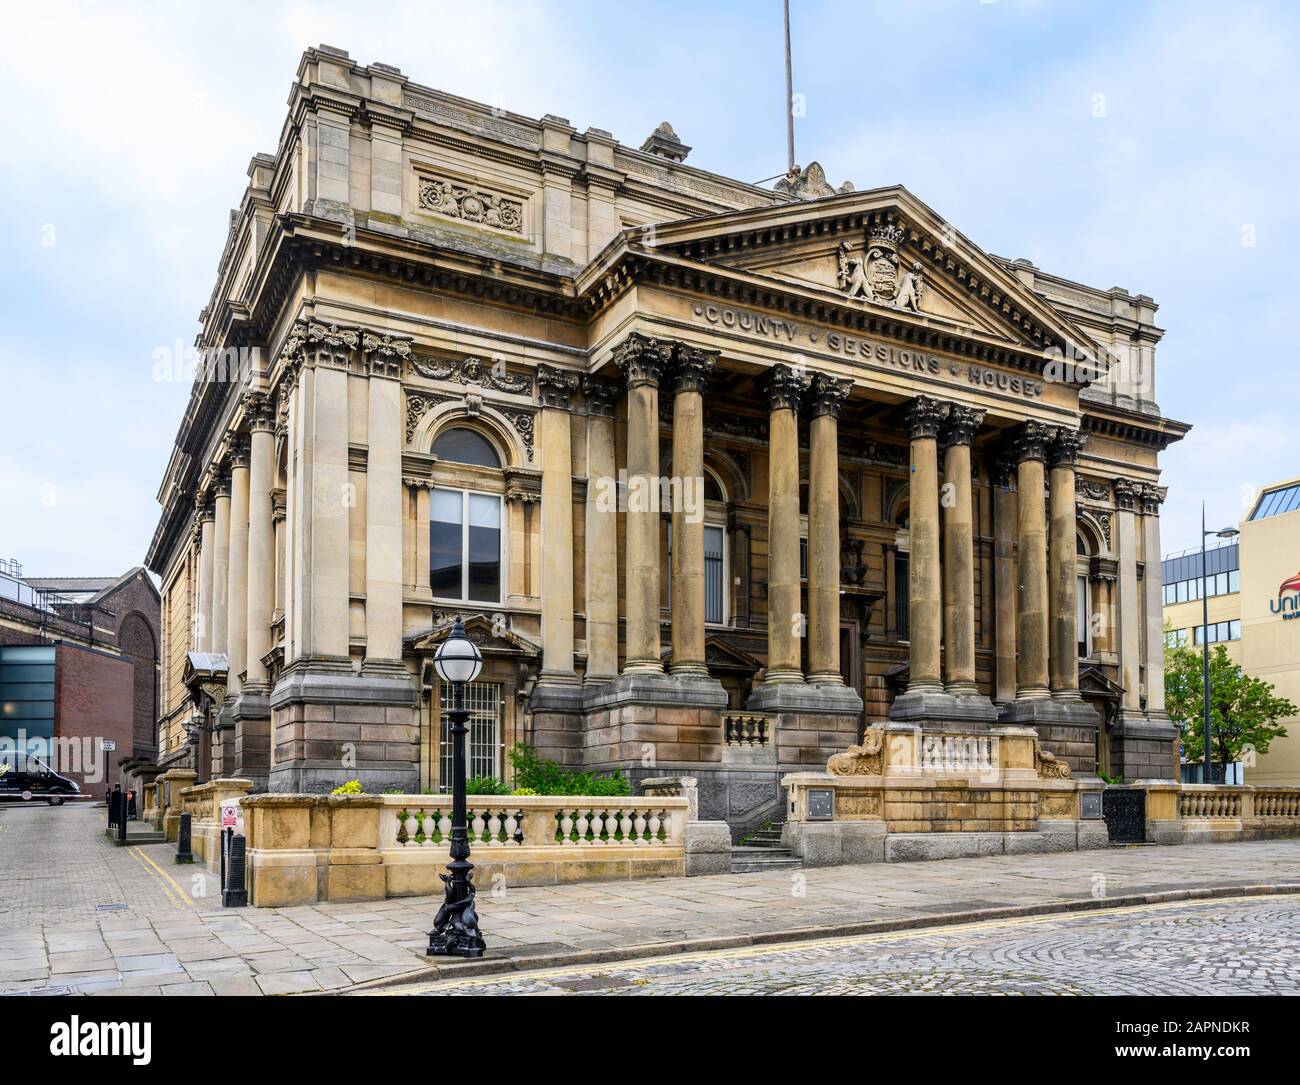 The County Sessions House (1884) on Islington, stands east of the Walker Art Gallery and contains offices of National Museums Liverpool. Stock Photo